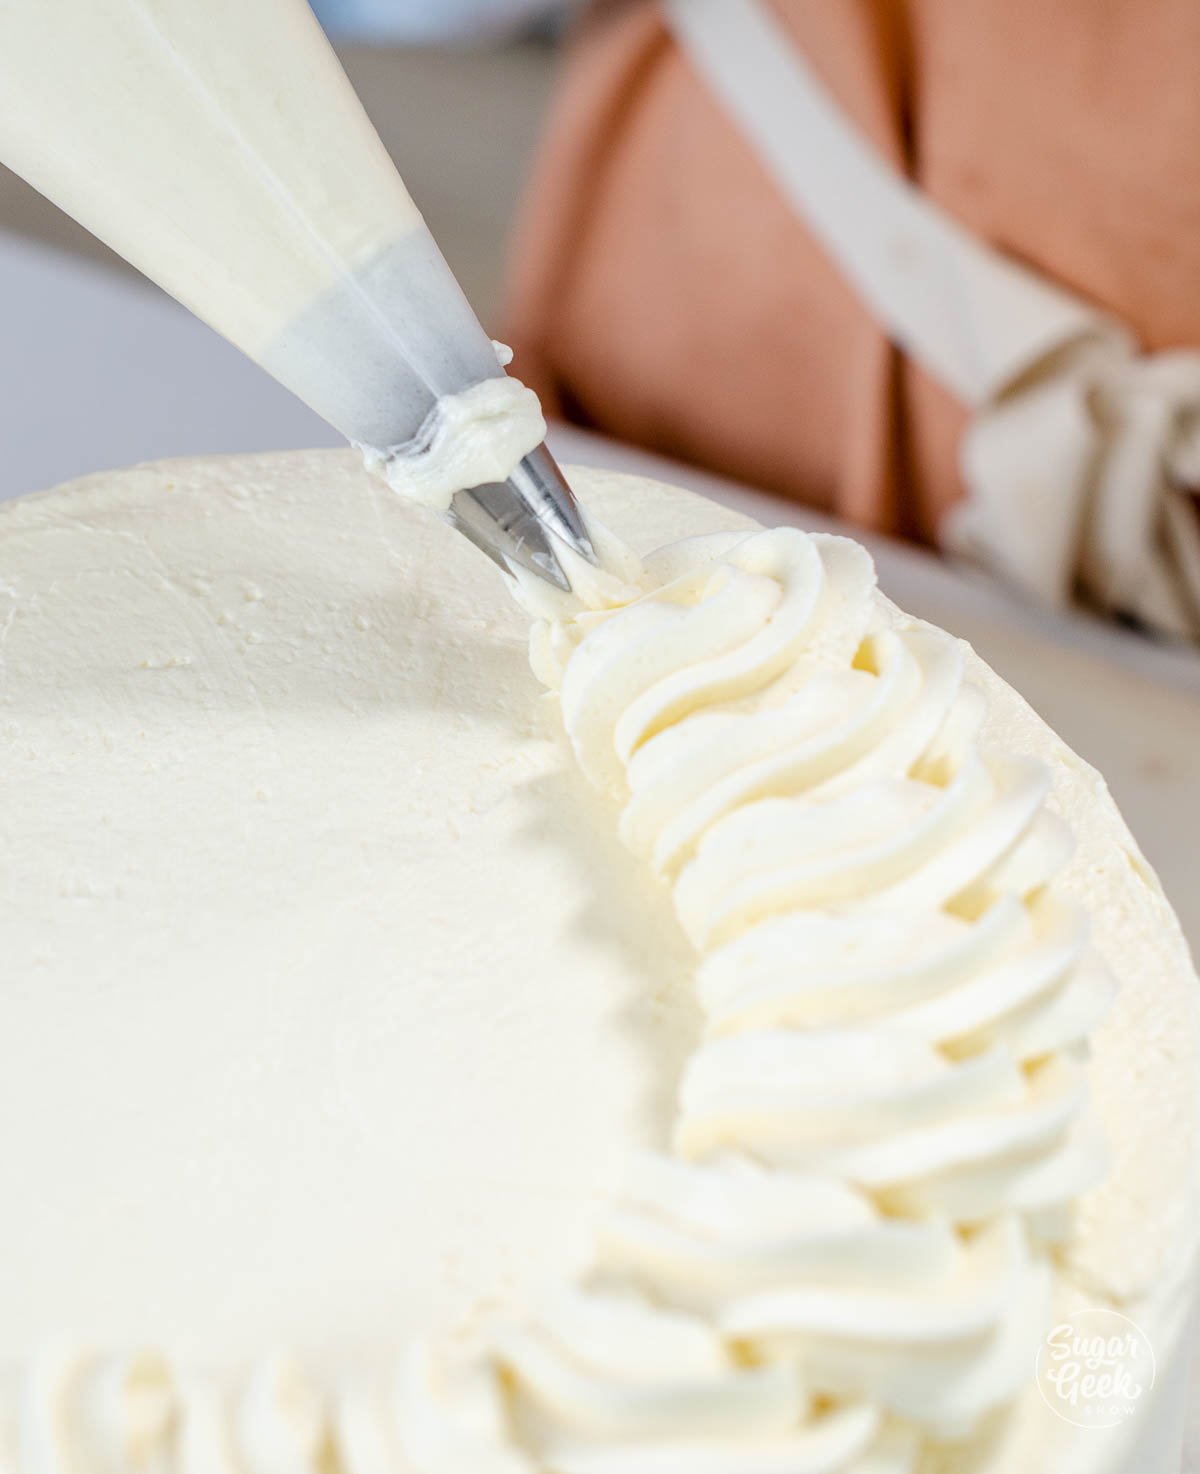 piping a rope border on top of the cake